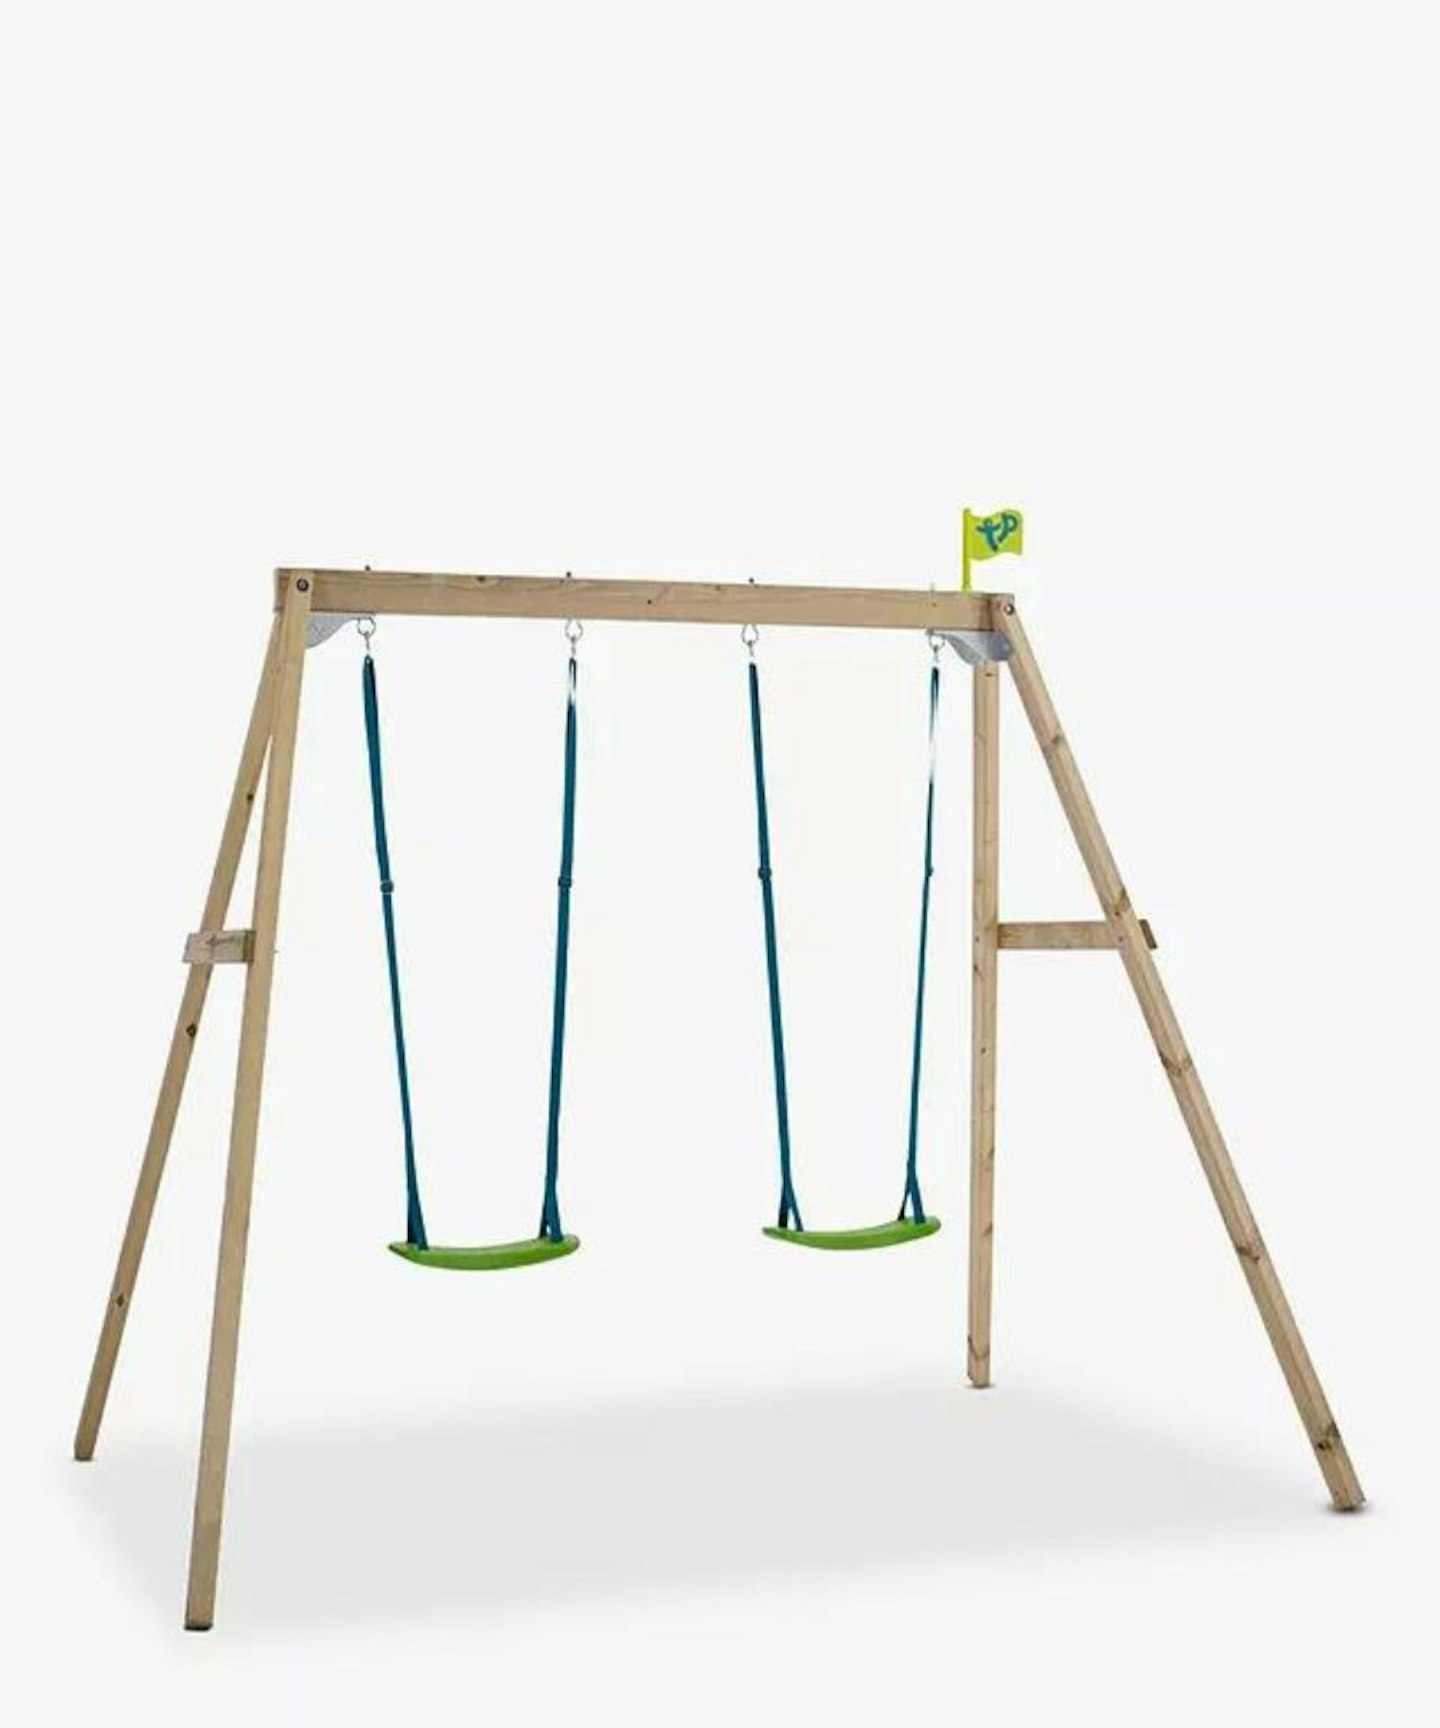 TP Toys Forest Double Swing Set